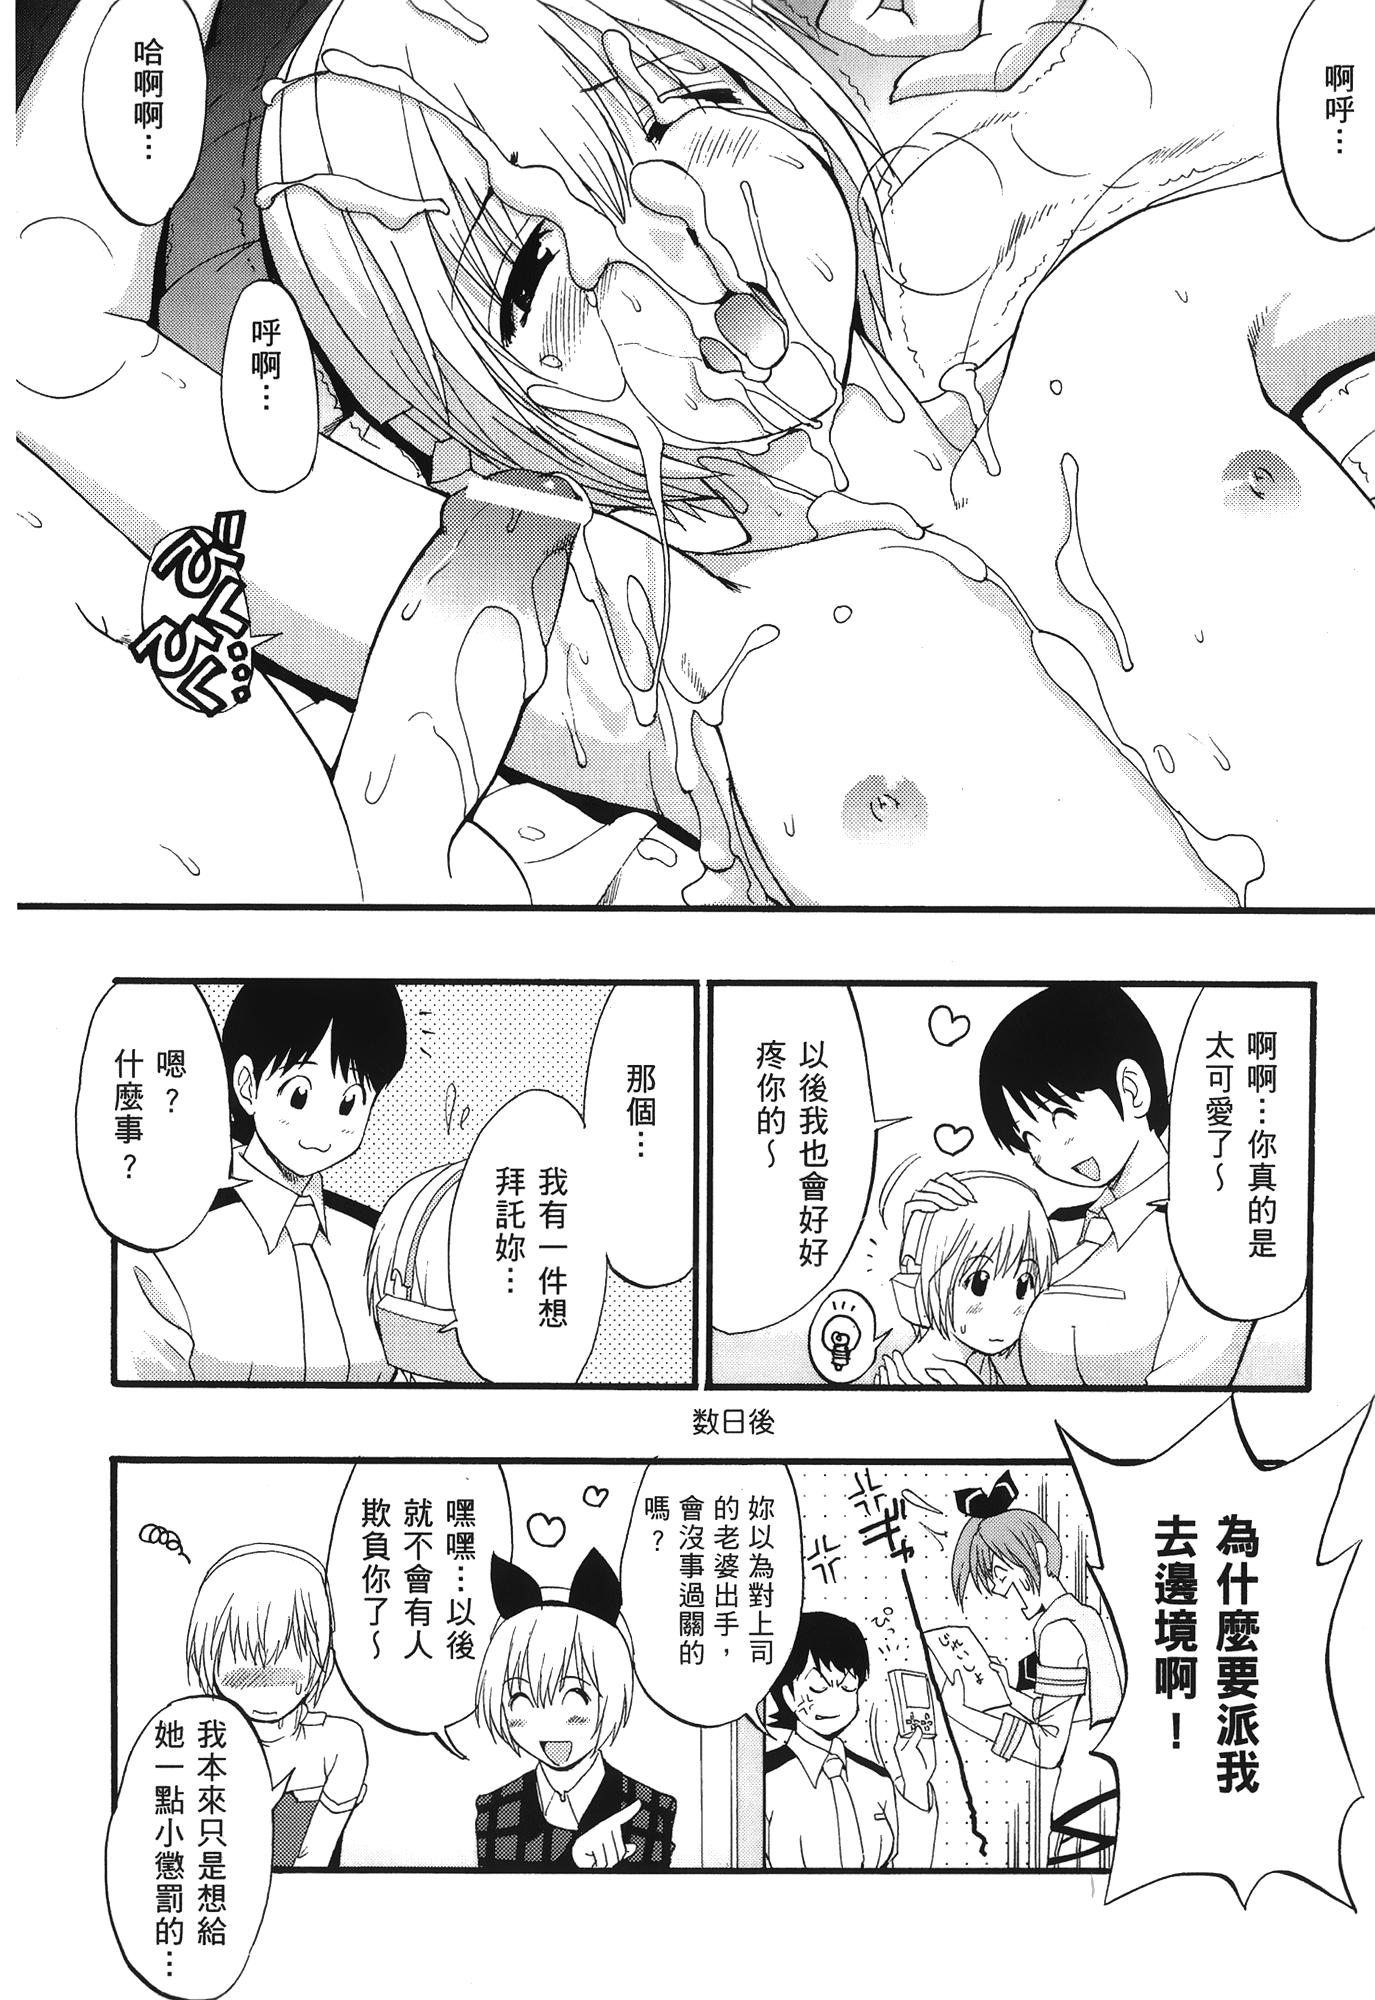 Rabuda [Saigado] THE YURI & FRIENDS 6 (King of Fighters) | 武鬥美少女 [Chinese] - King of fighters Black Gay - Page 159